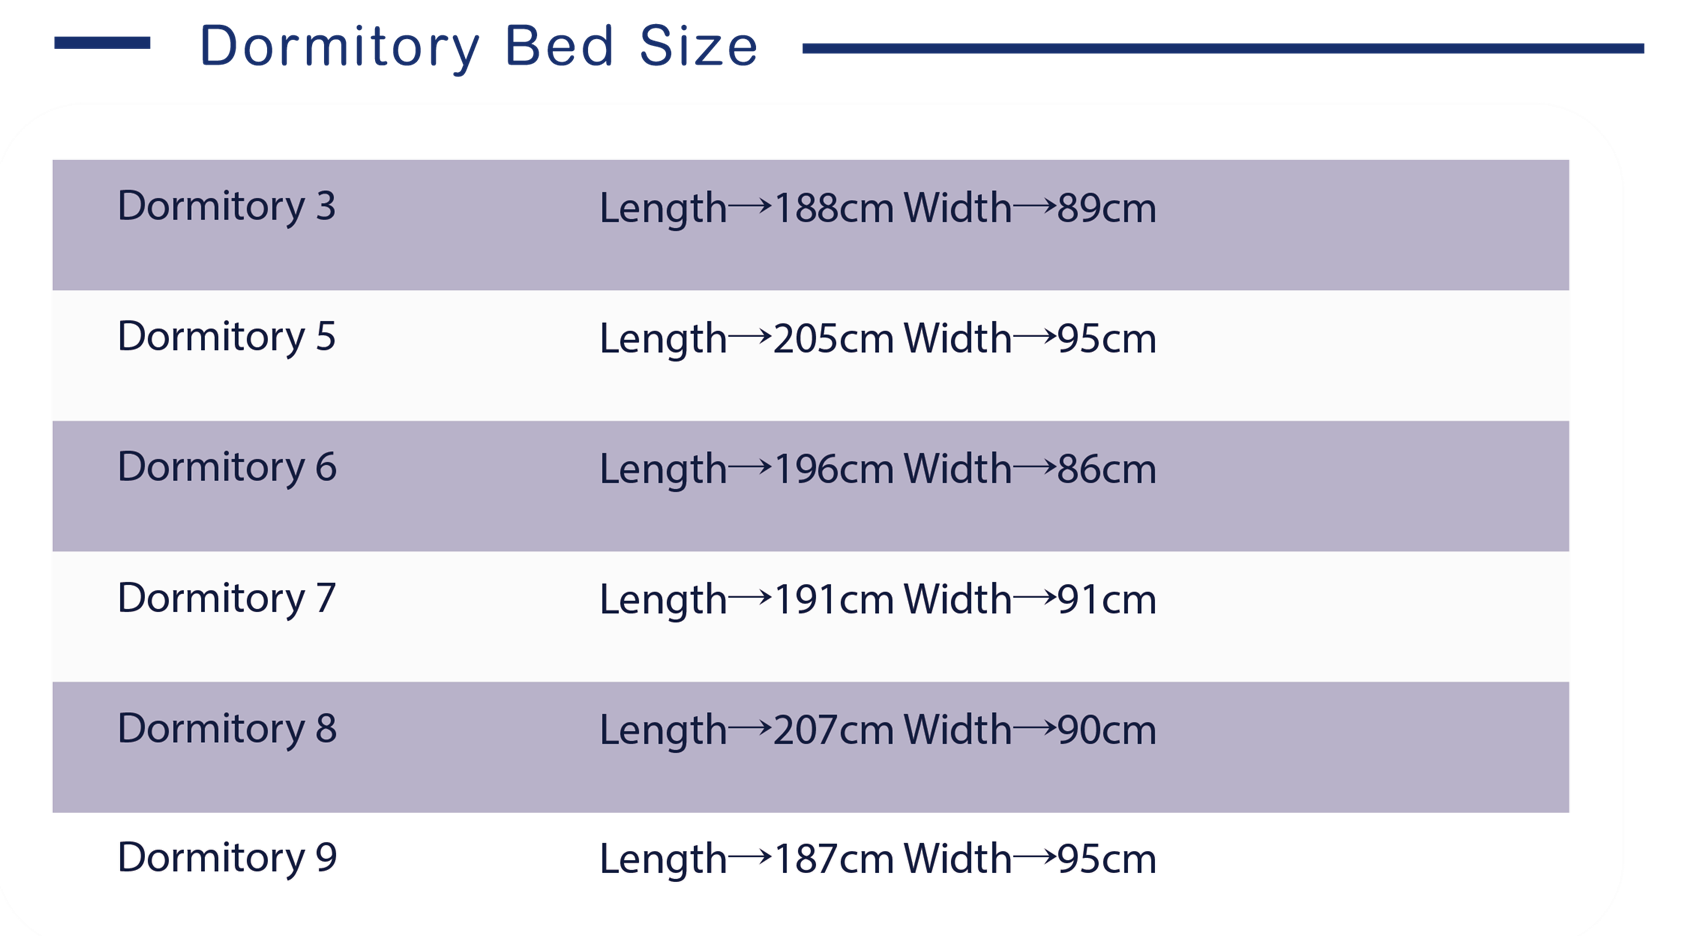 Here is the information of dormitory bed size.